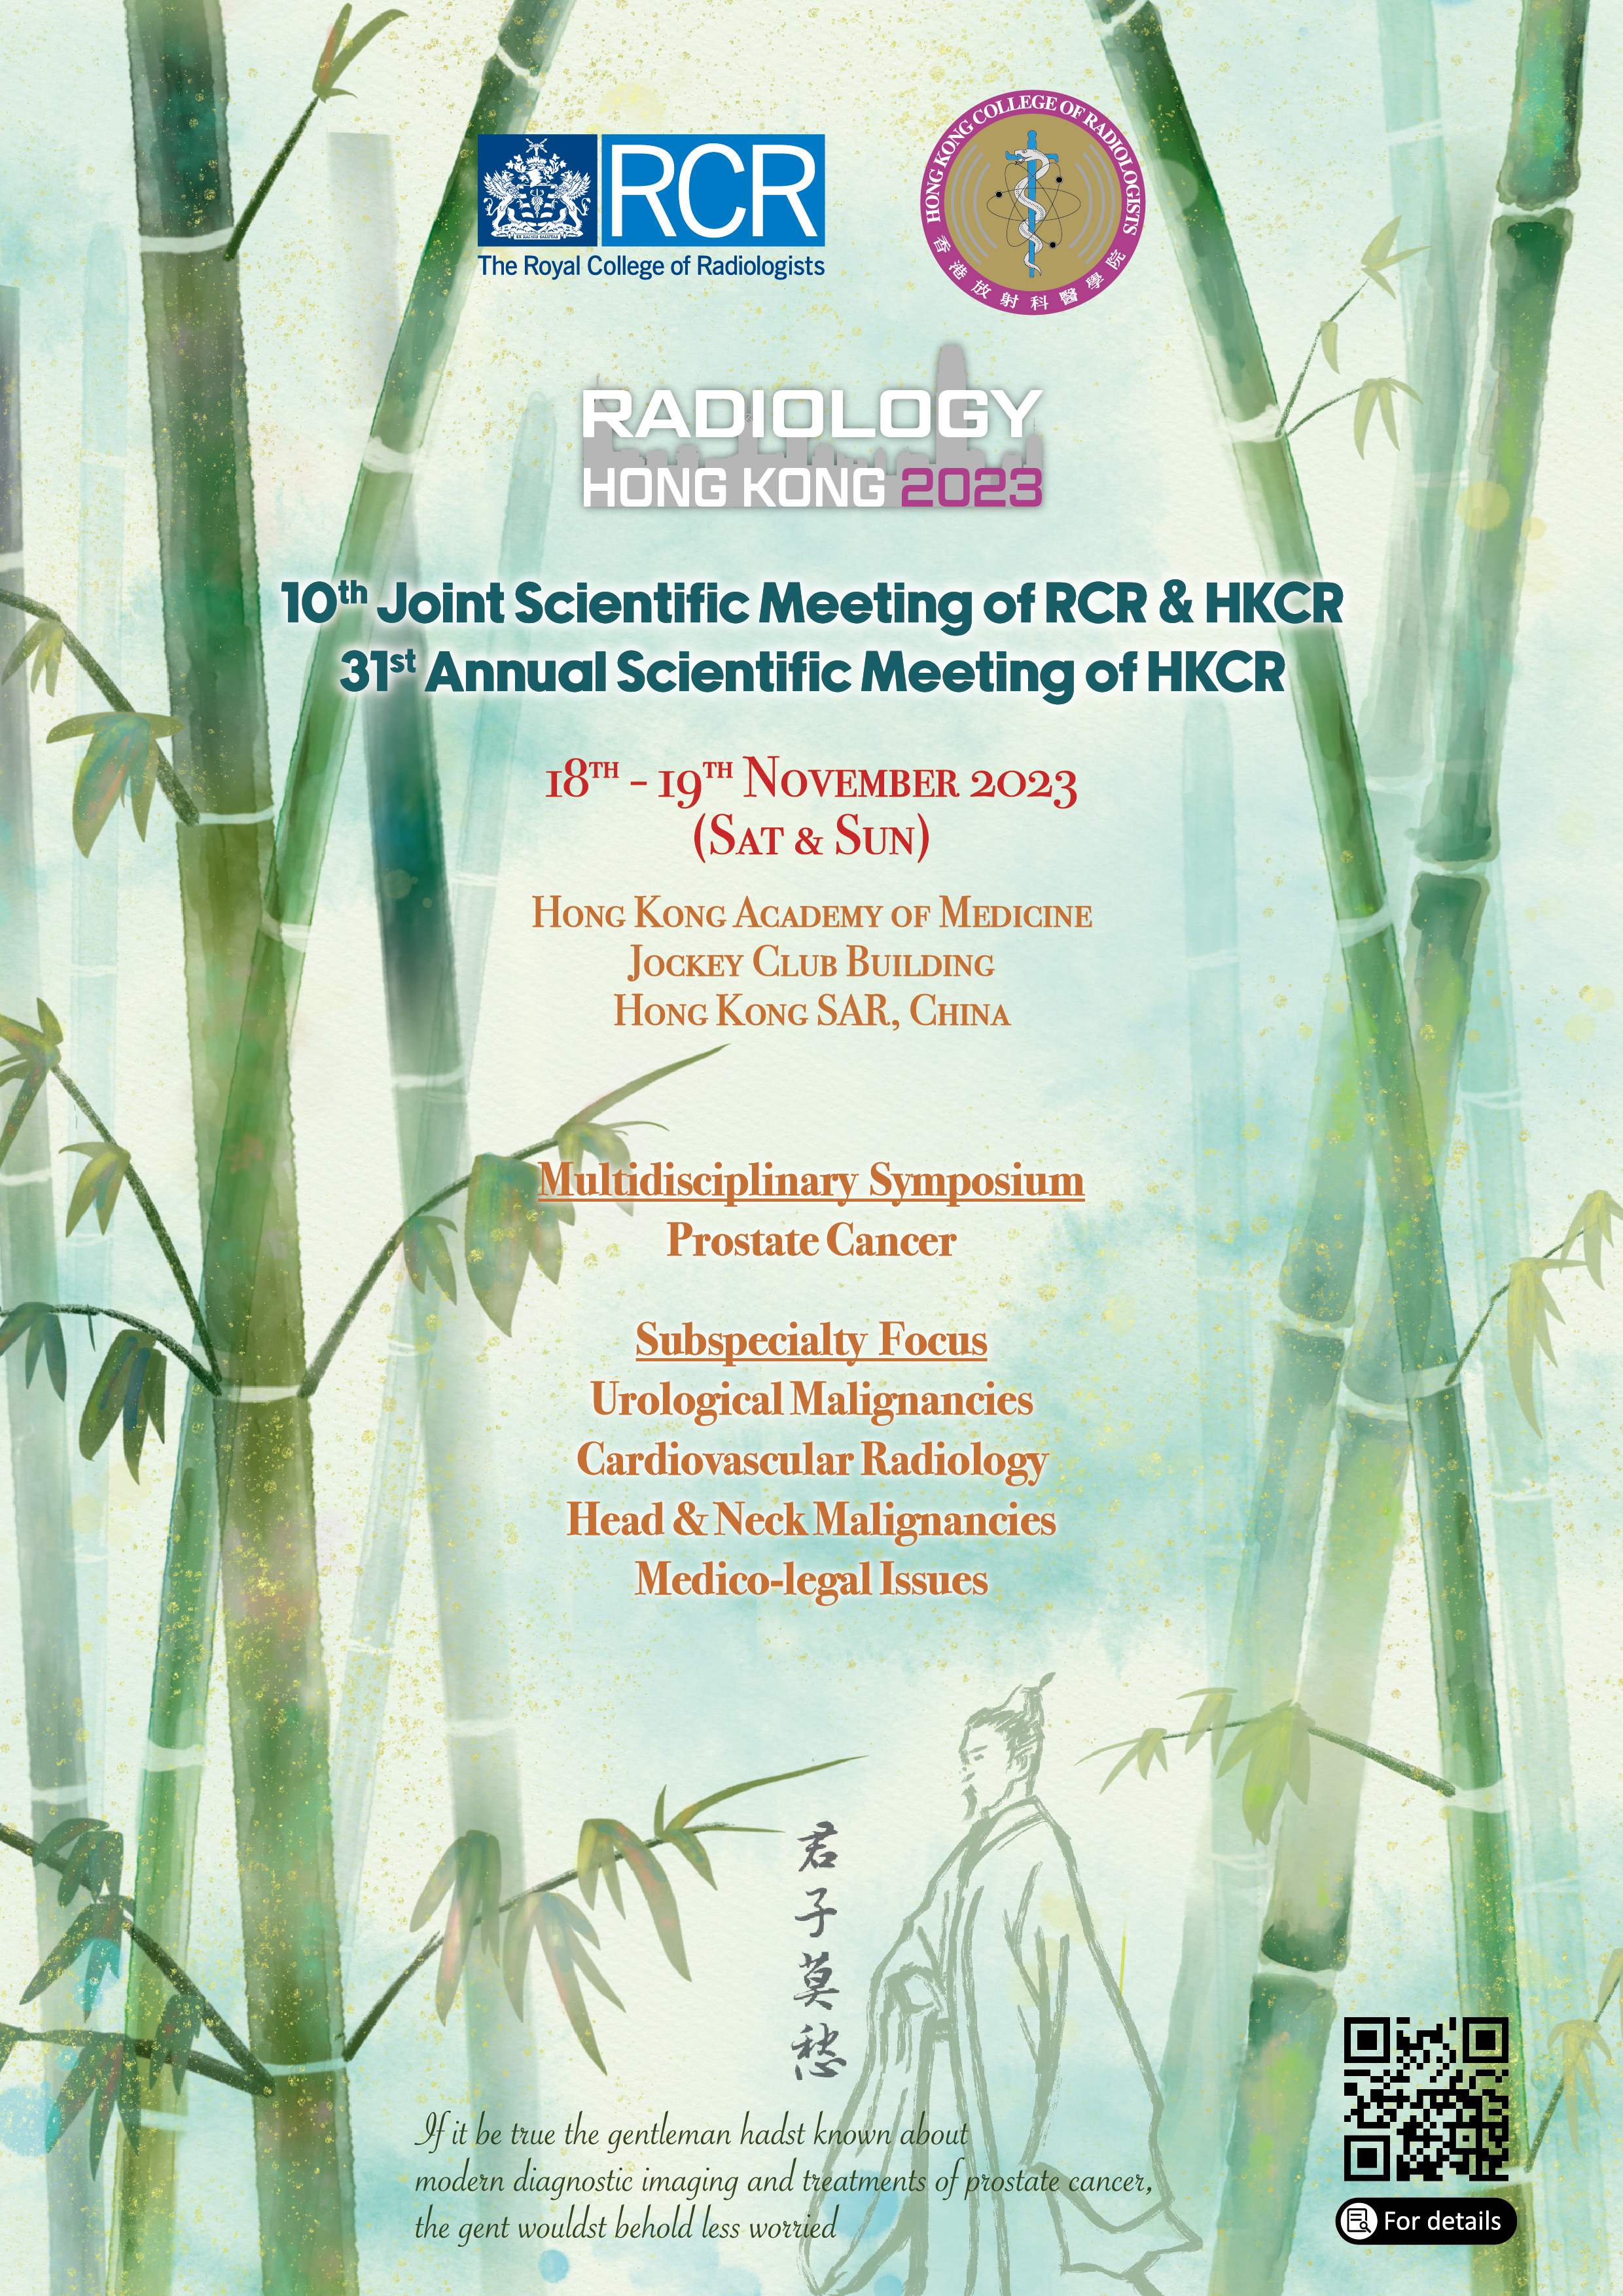 10th Joint Scientific Meeting of RCR & HKCR and 31st Annual Scientific Meeting of HKCR